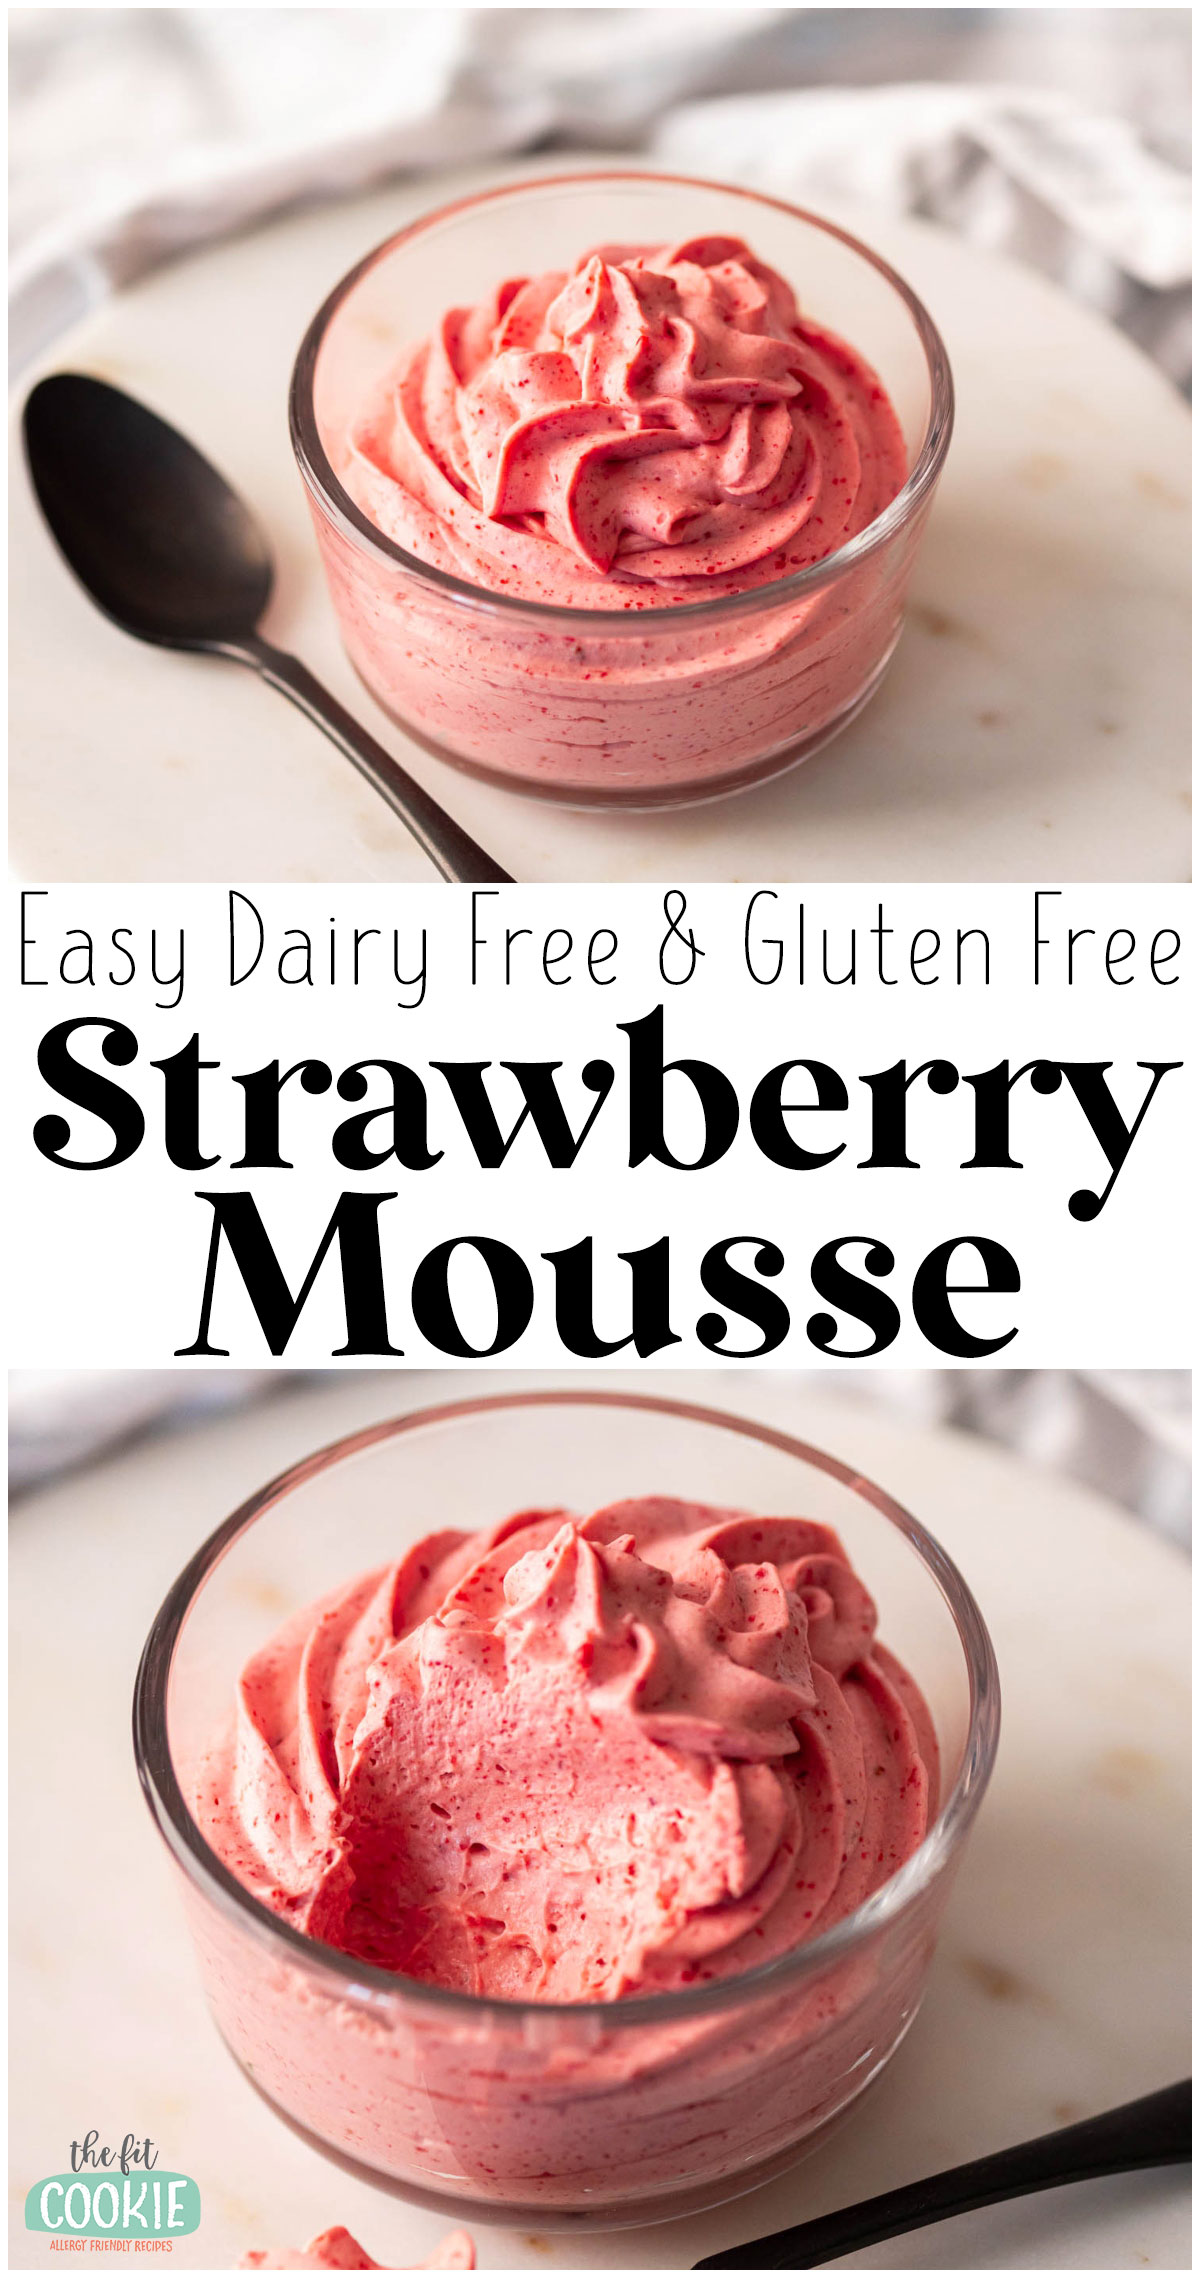 A glass bowl filled with strawberry mousse accompanied by a descriptive text saying "easy dairy free & gluten free strawberry mousse.